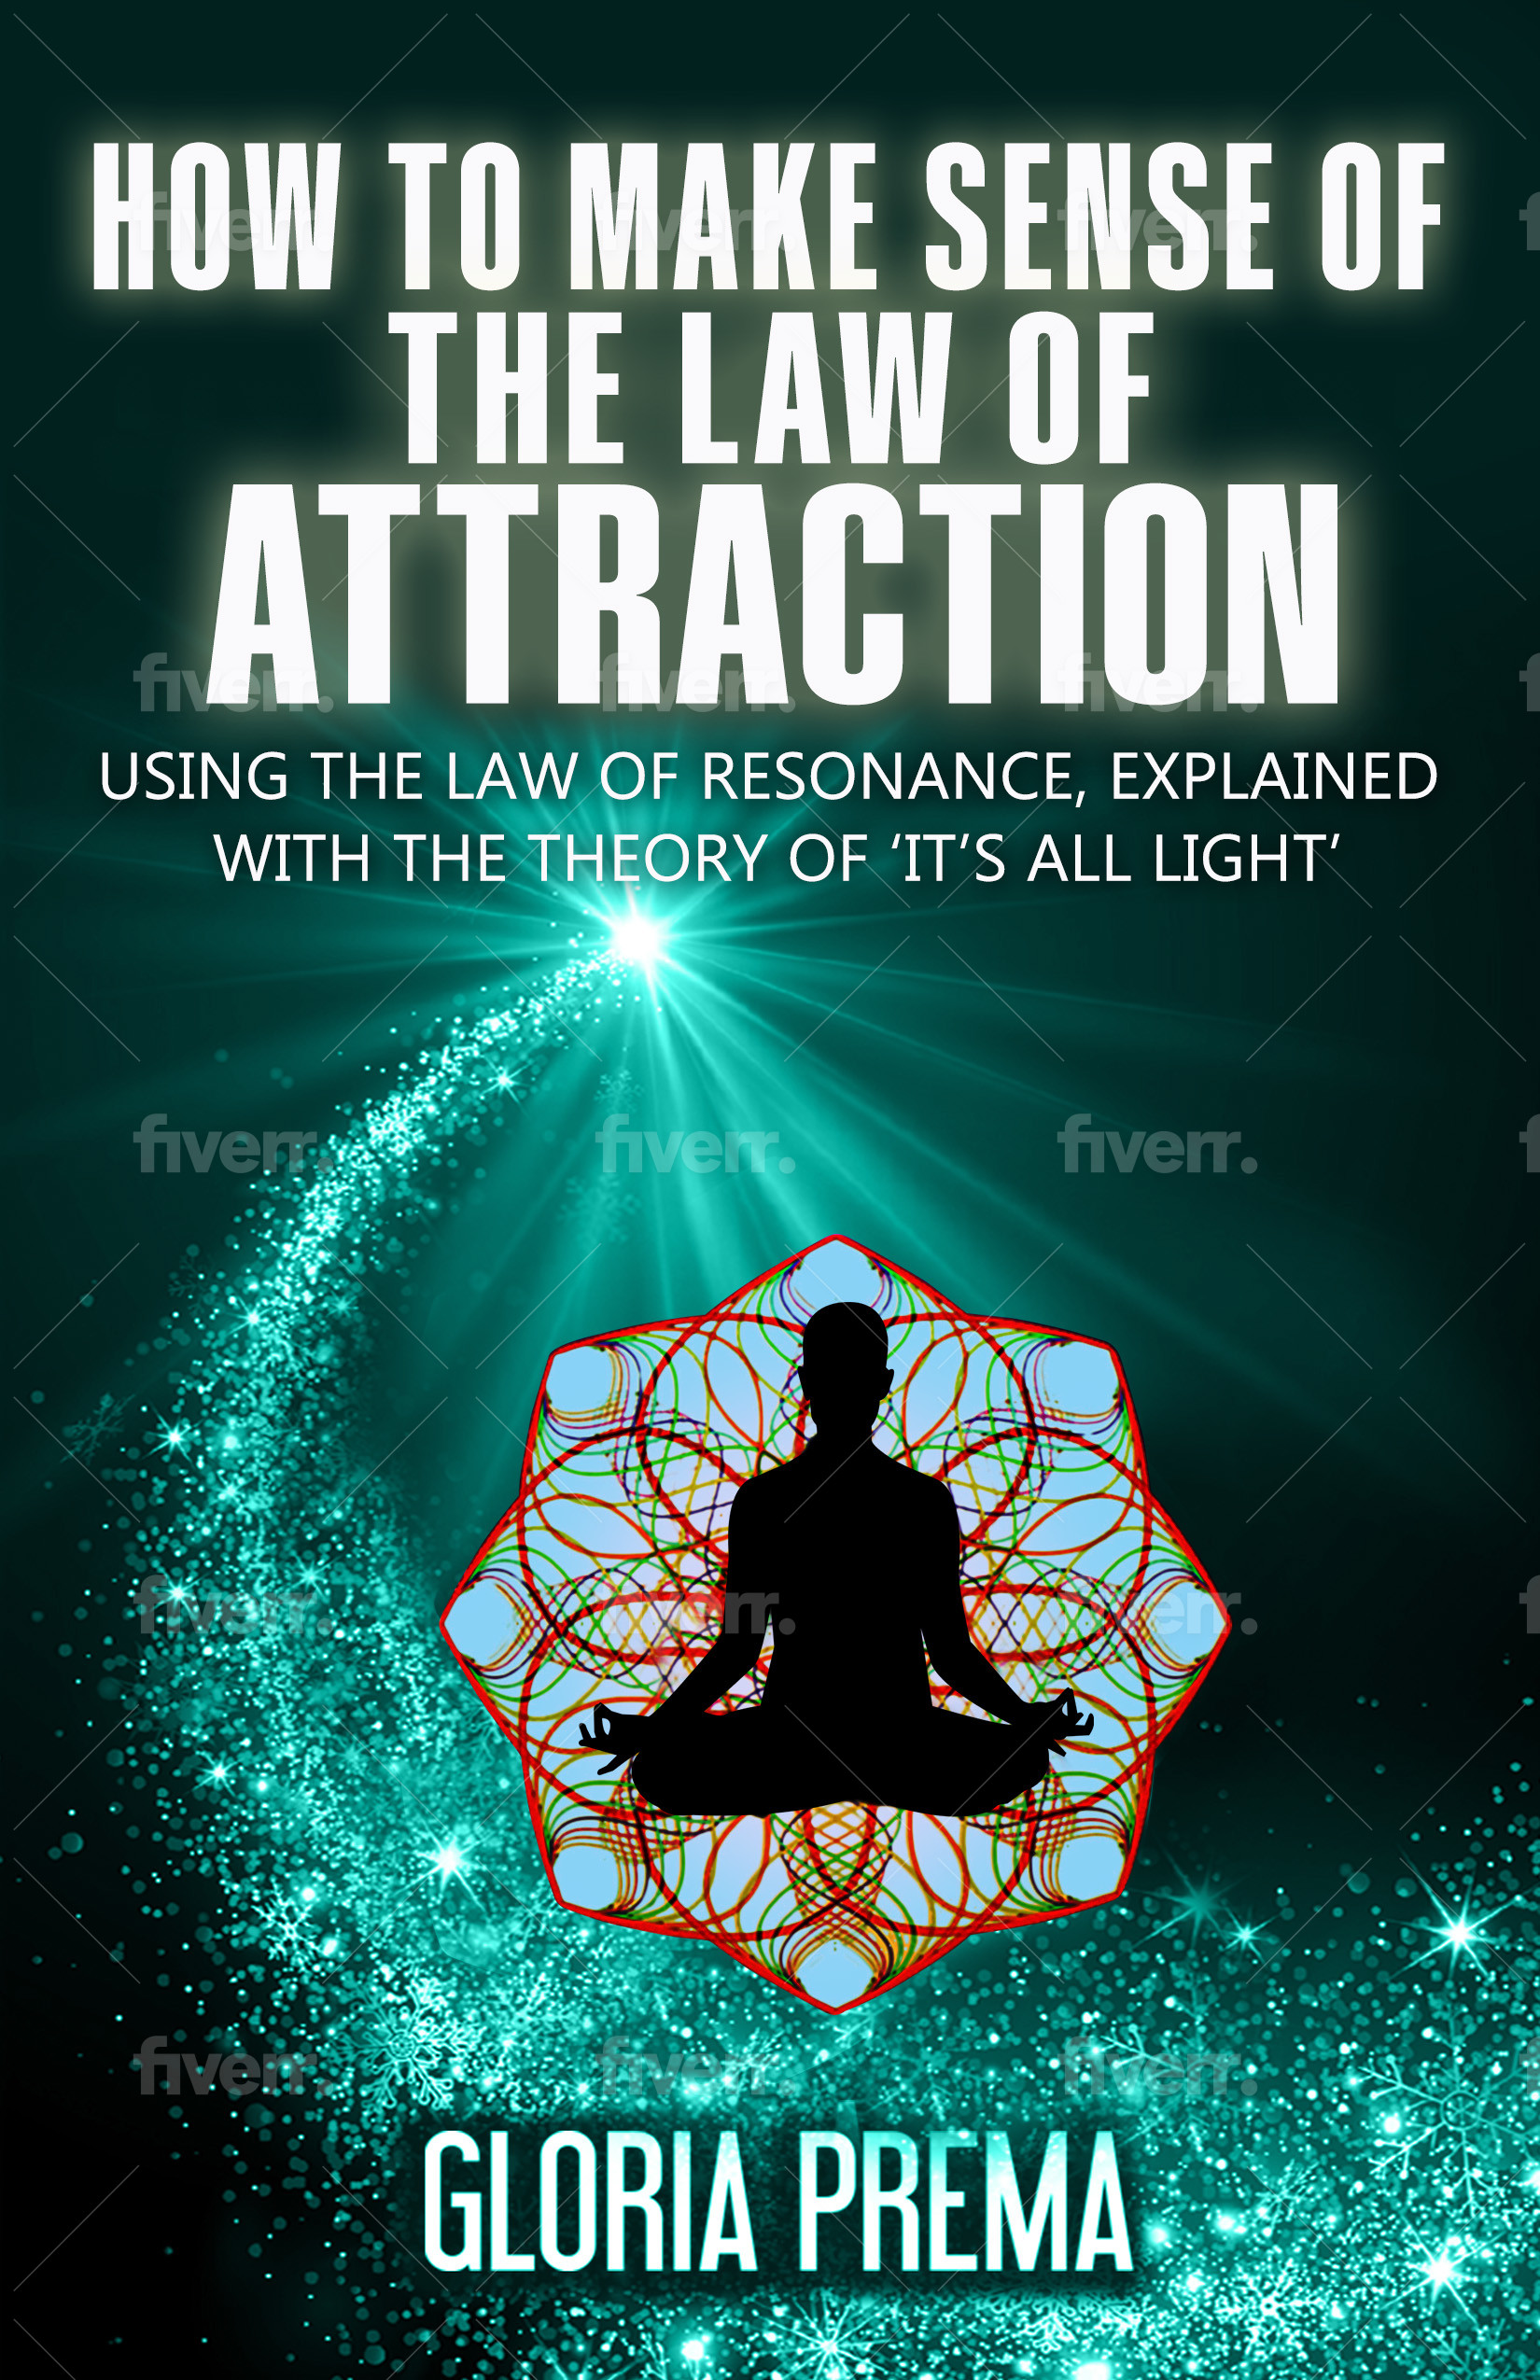 How To Make Sense Of The Law Of Attraction